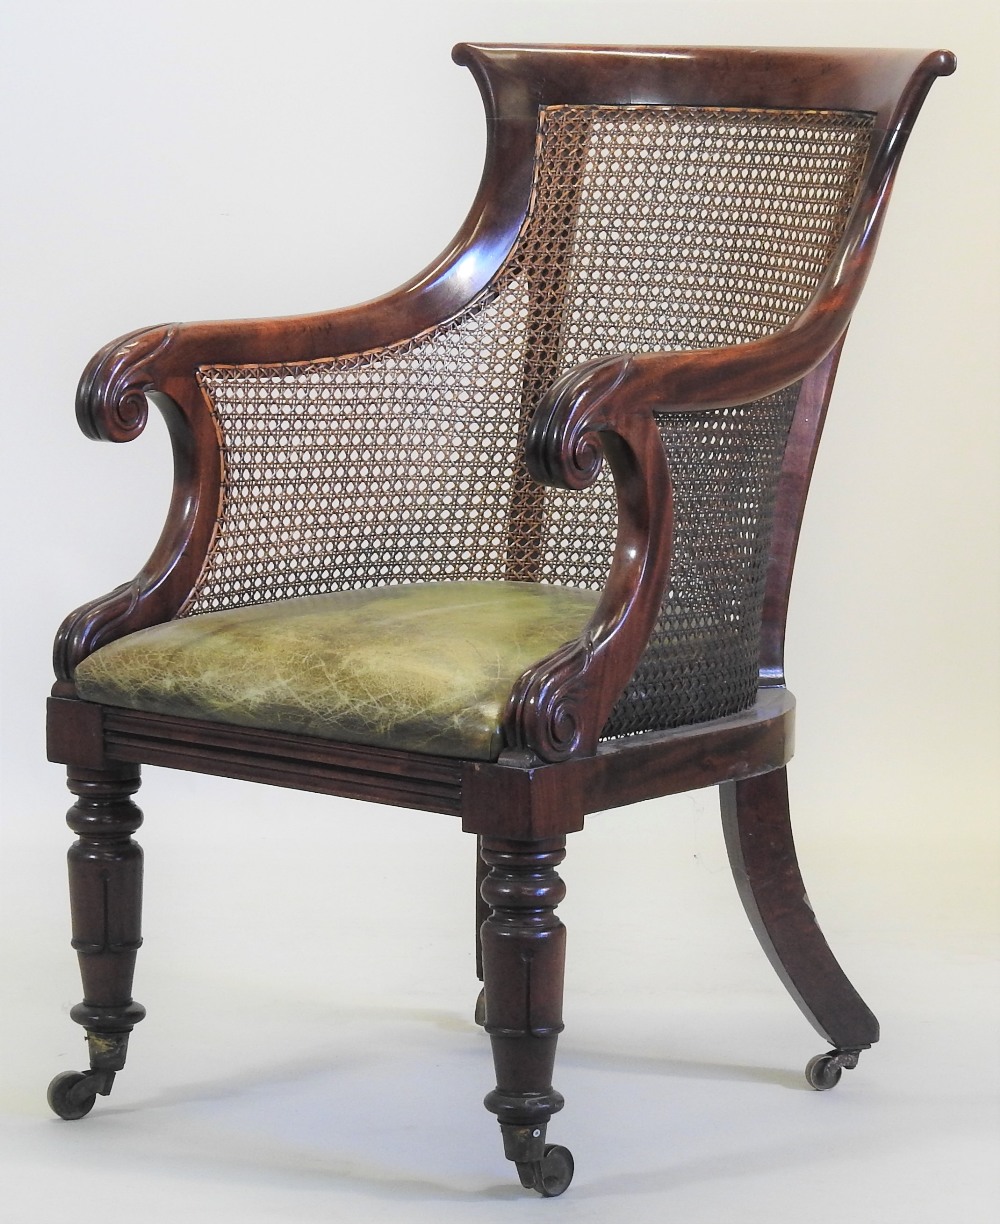 A late Regency carved mahogany single cane bergere armchair, - Image 3 of 11